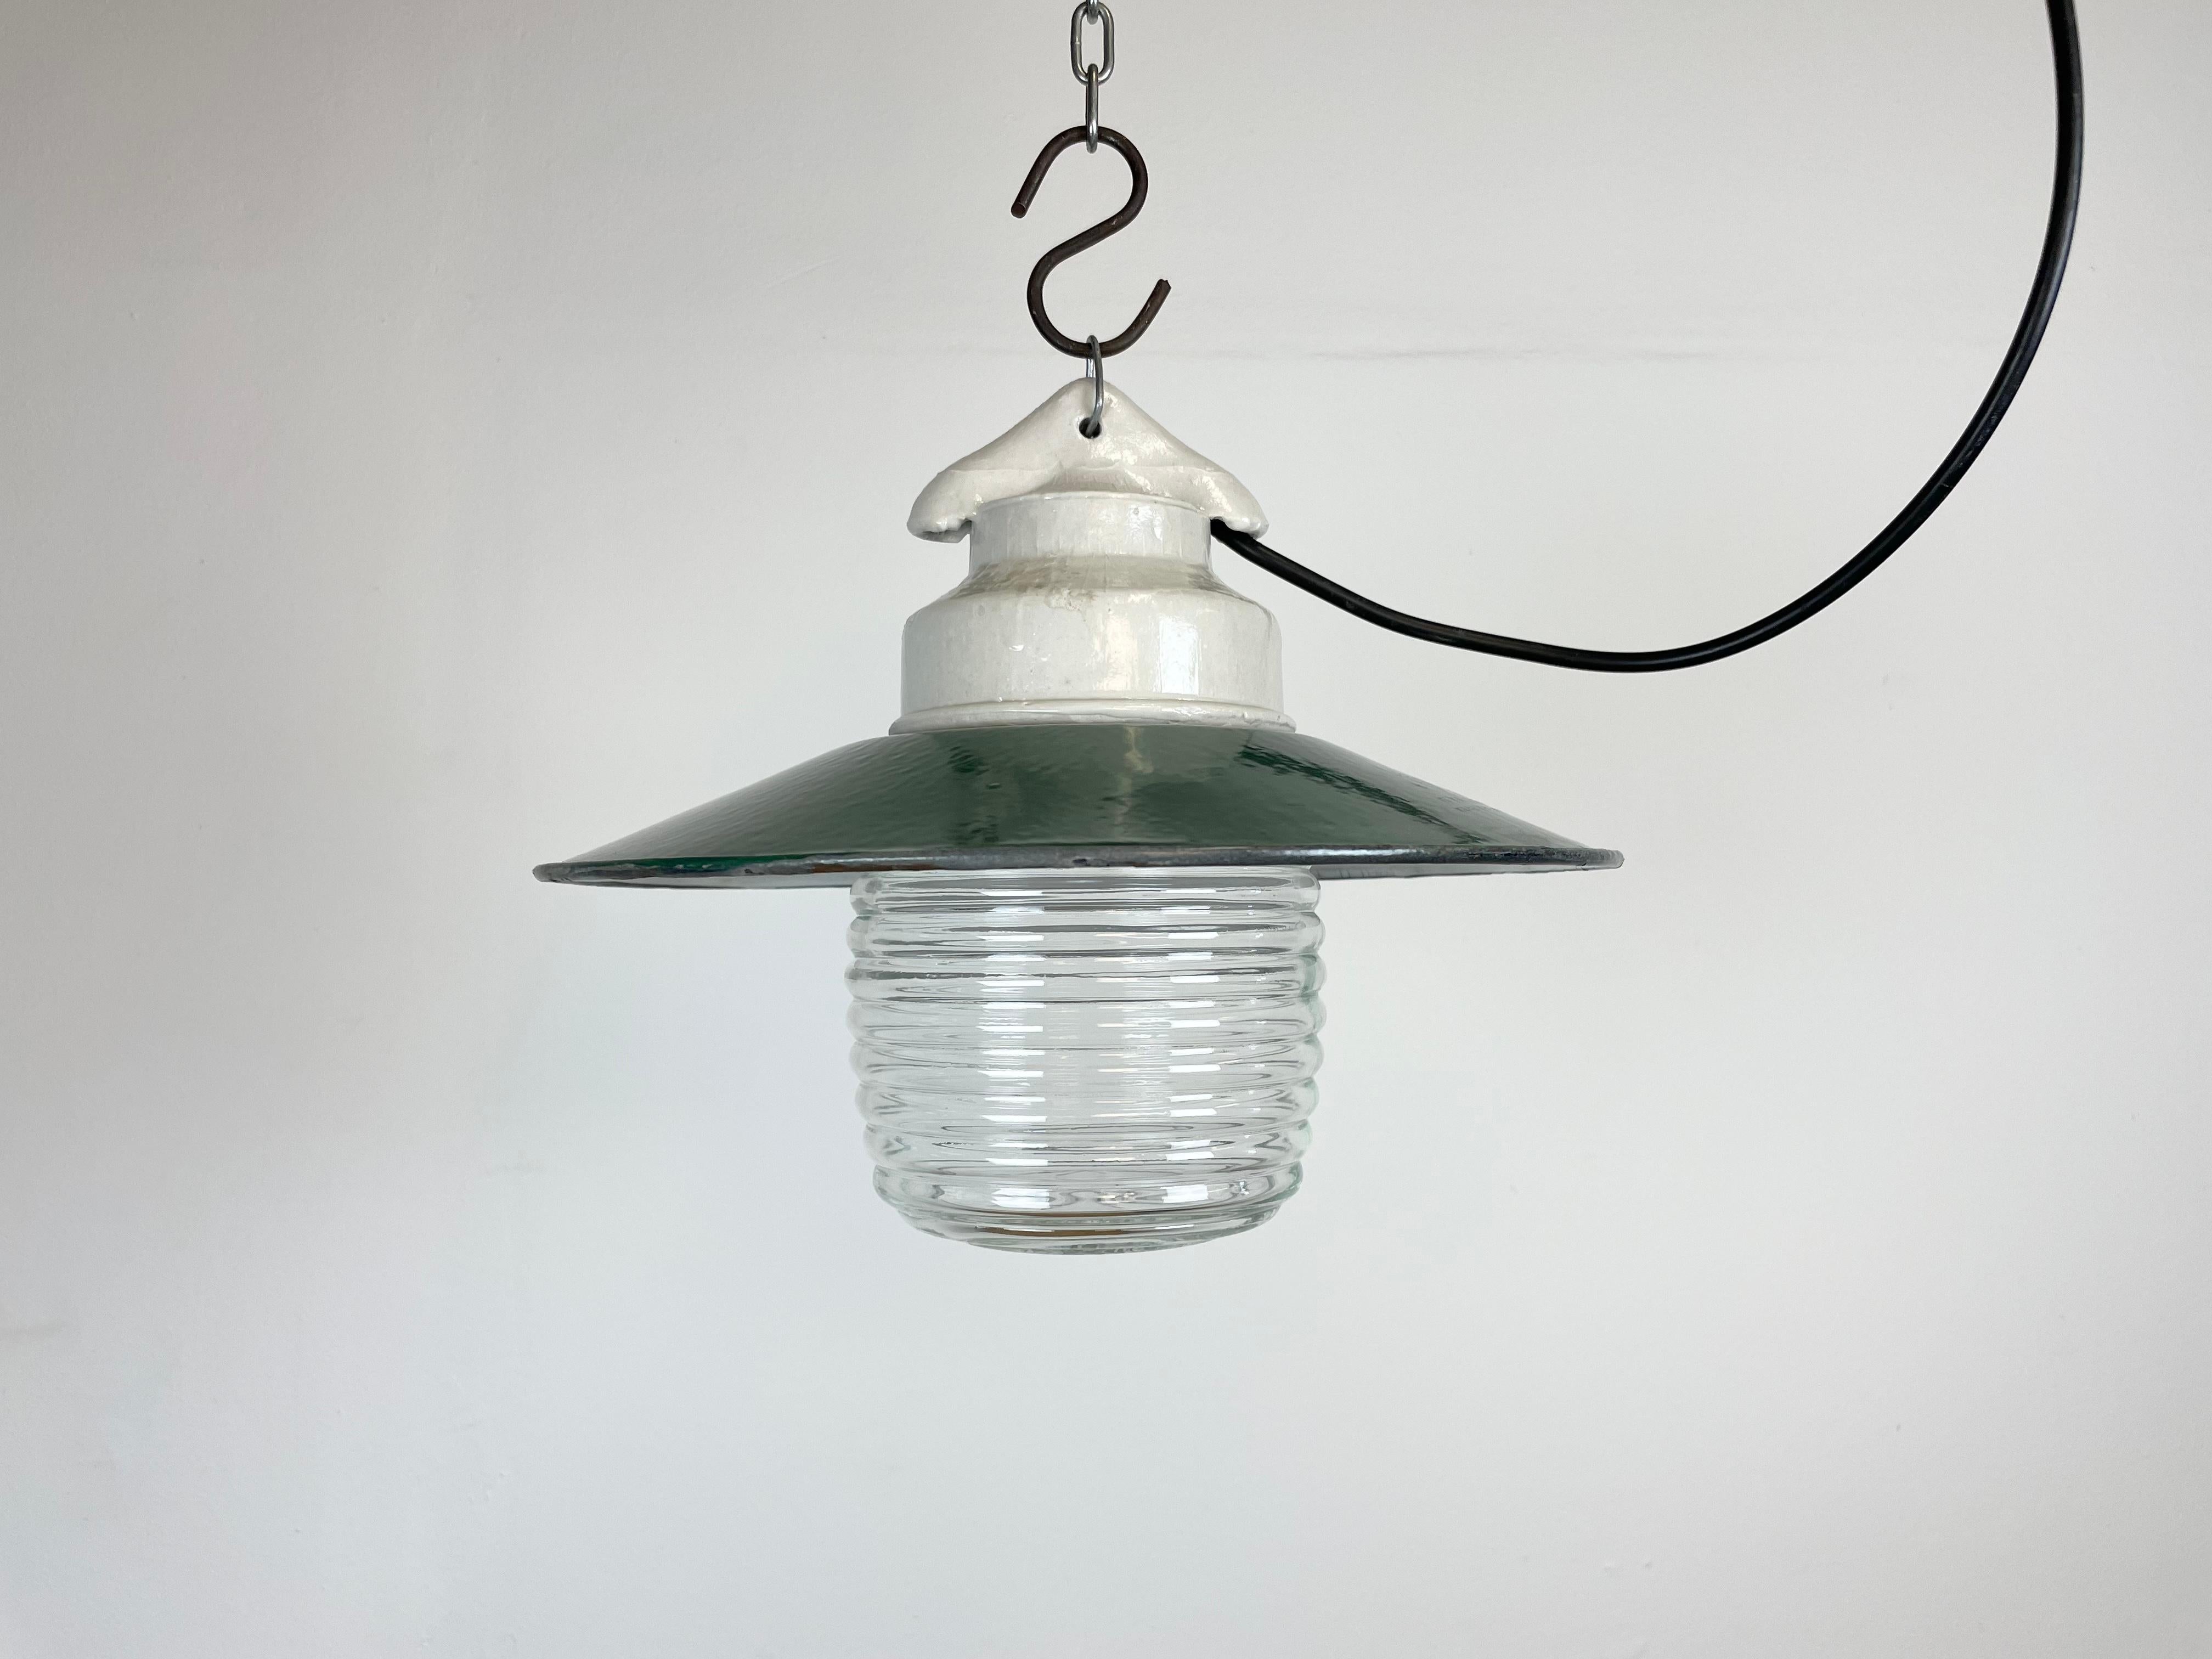 Vintage industrial light made in former Soviet Union during the 1970s.It features white porcelain top, a green enamel shade with white enamel interior and ribbed clear glass cover. The socket requires E27/ E26 light bulbs. New wire. The weight of